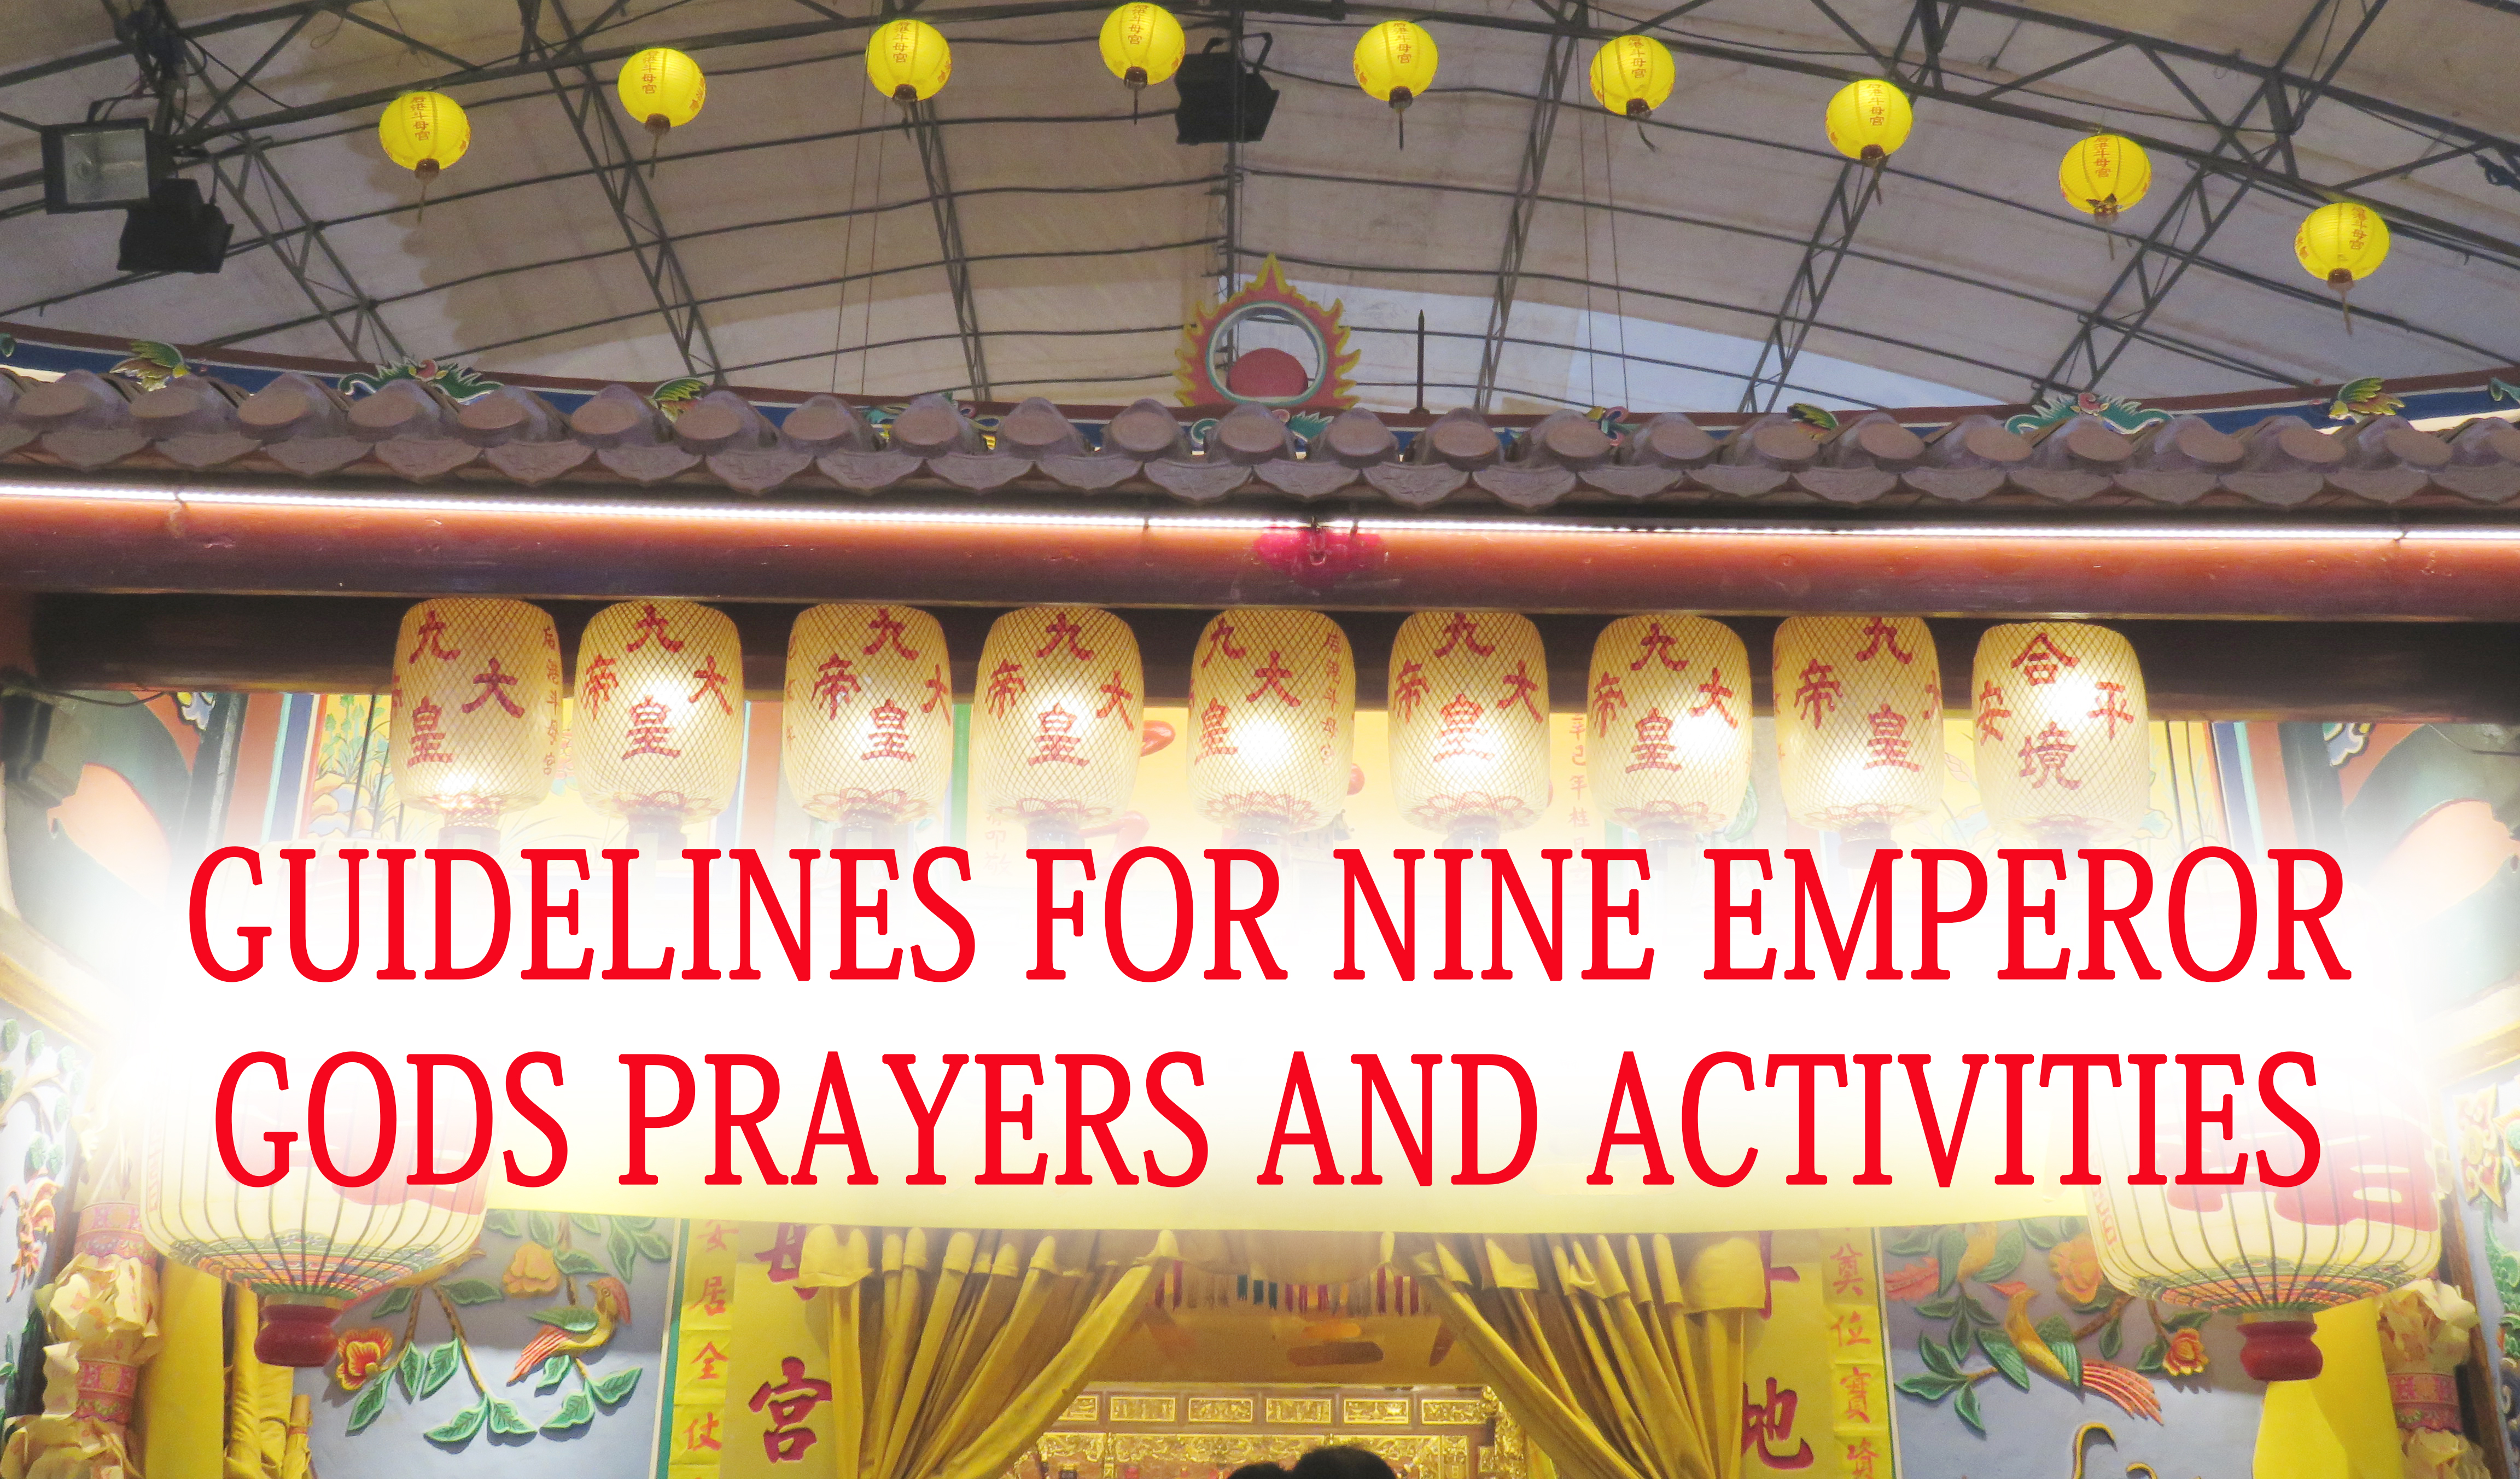 GUIDELINES FOR NINE EMPEROR GODS PRAYERS AND ACTIVITIES